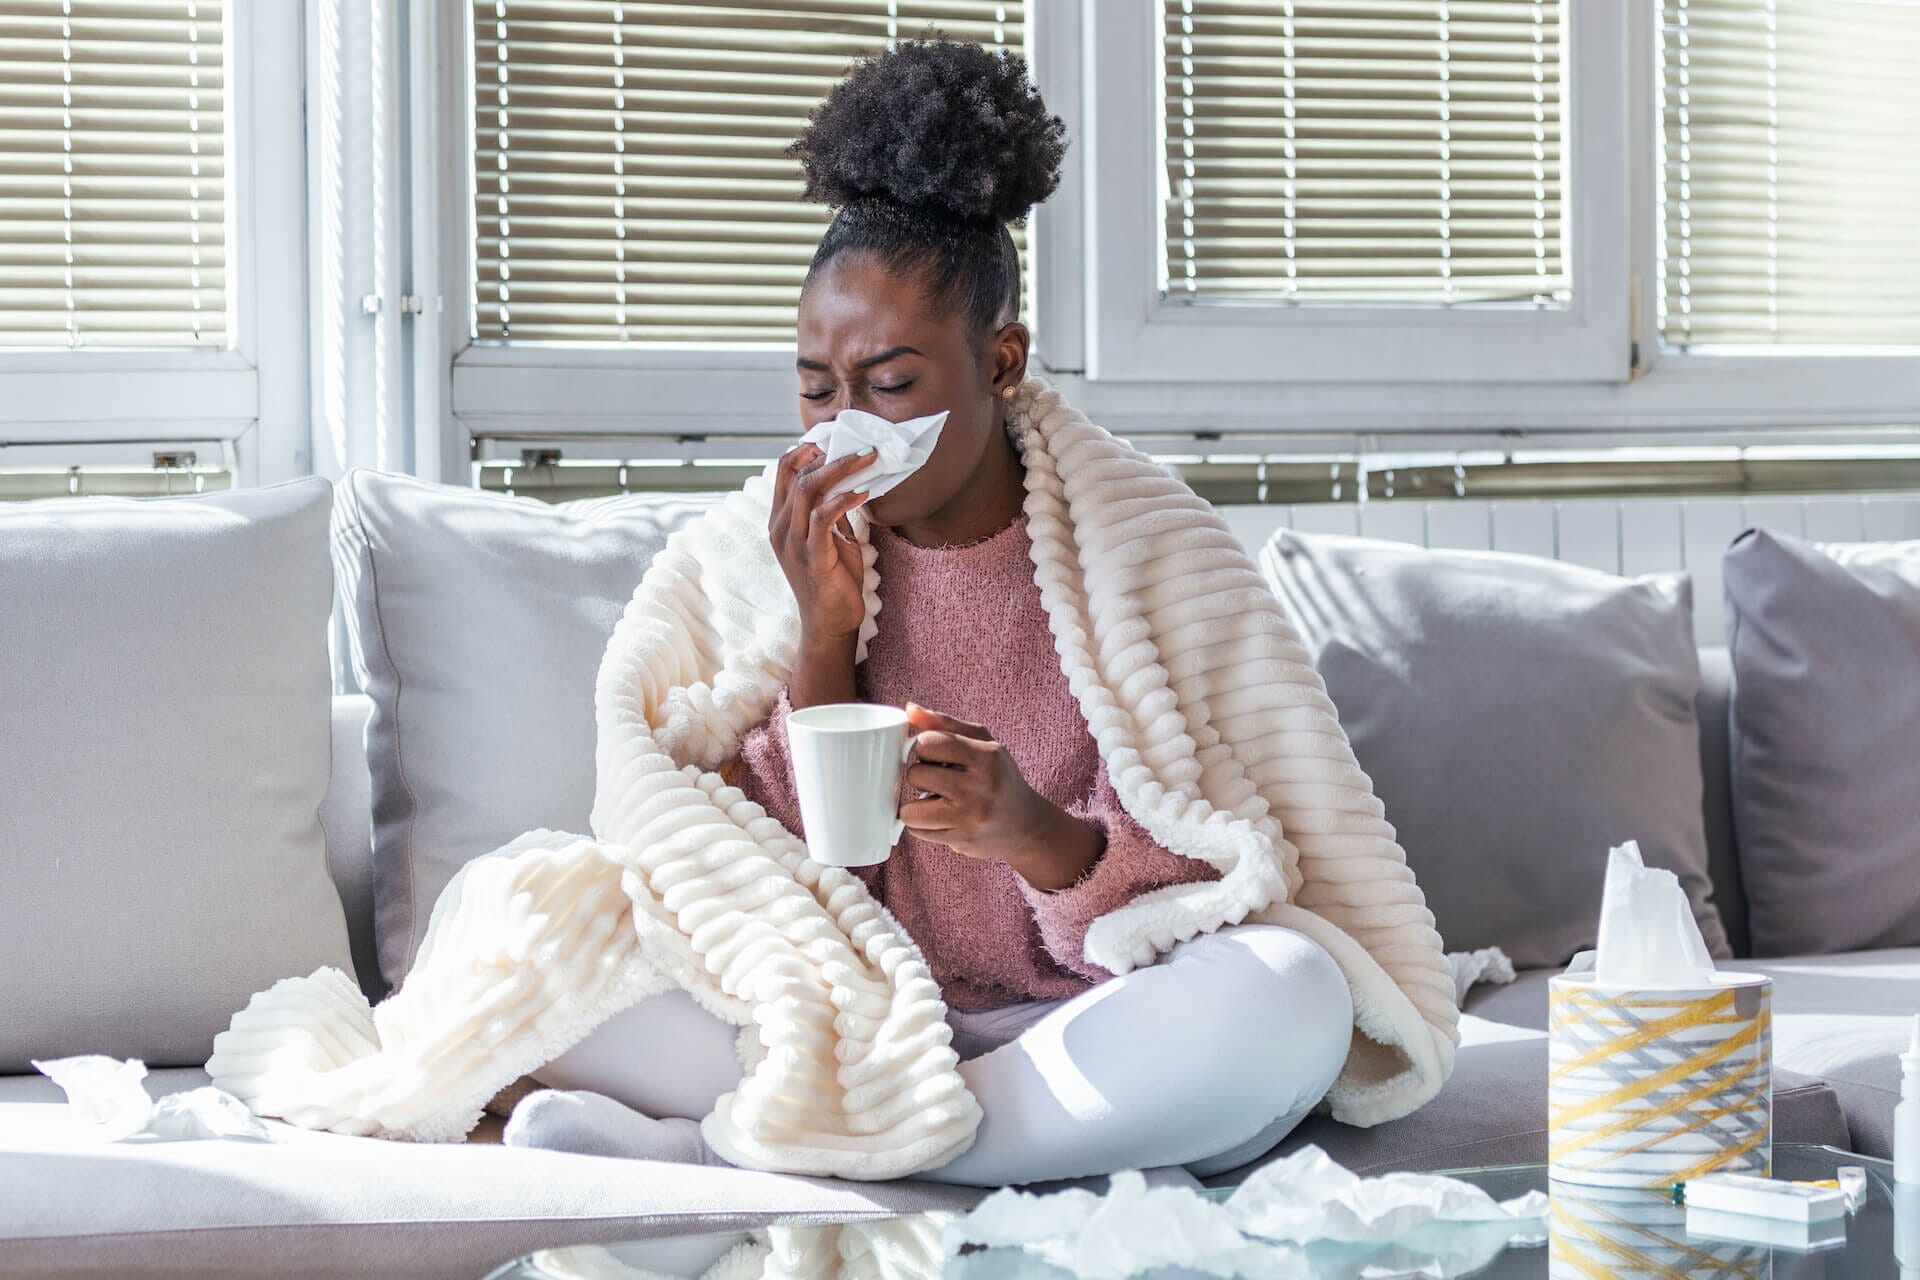 Discover the Best Air Purifier for Colds and Flu this season from MedicAir.